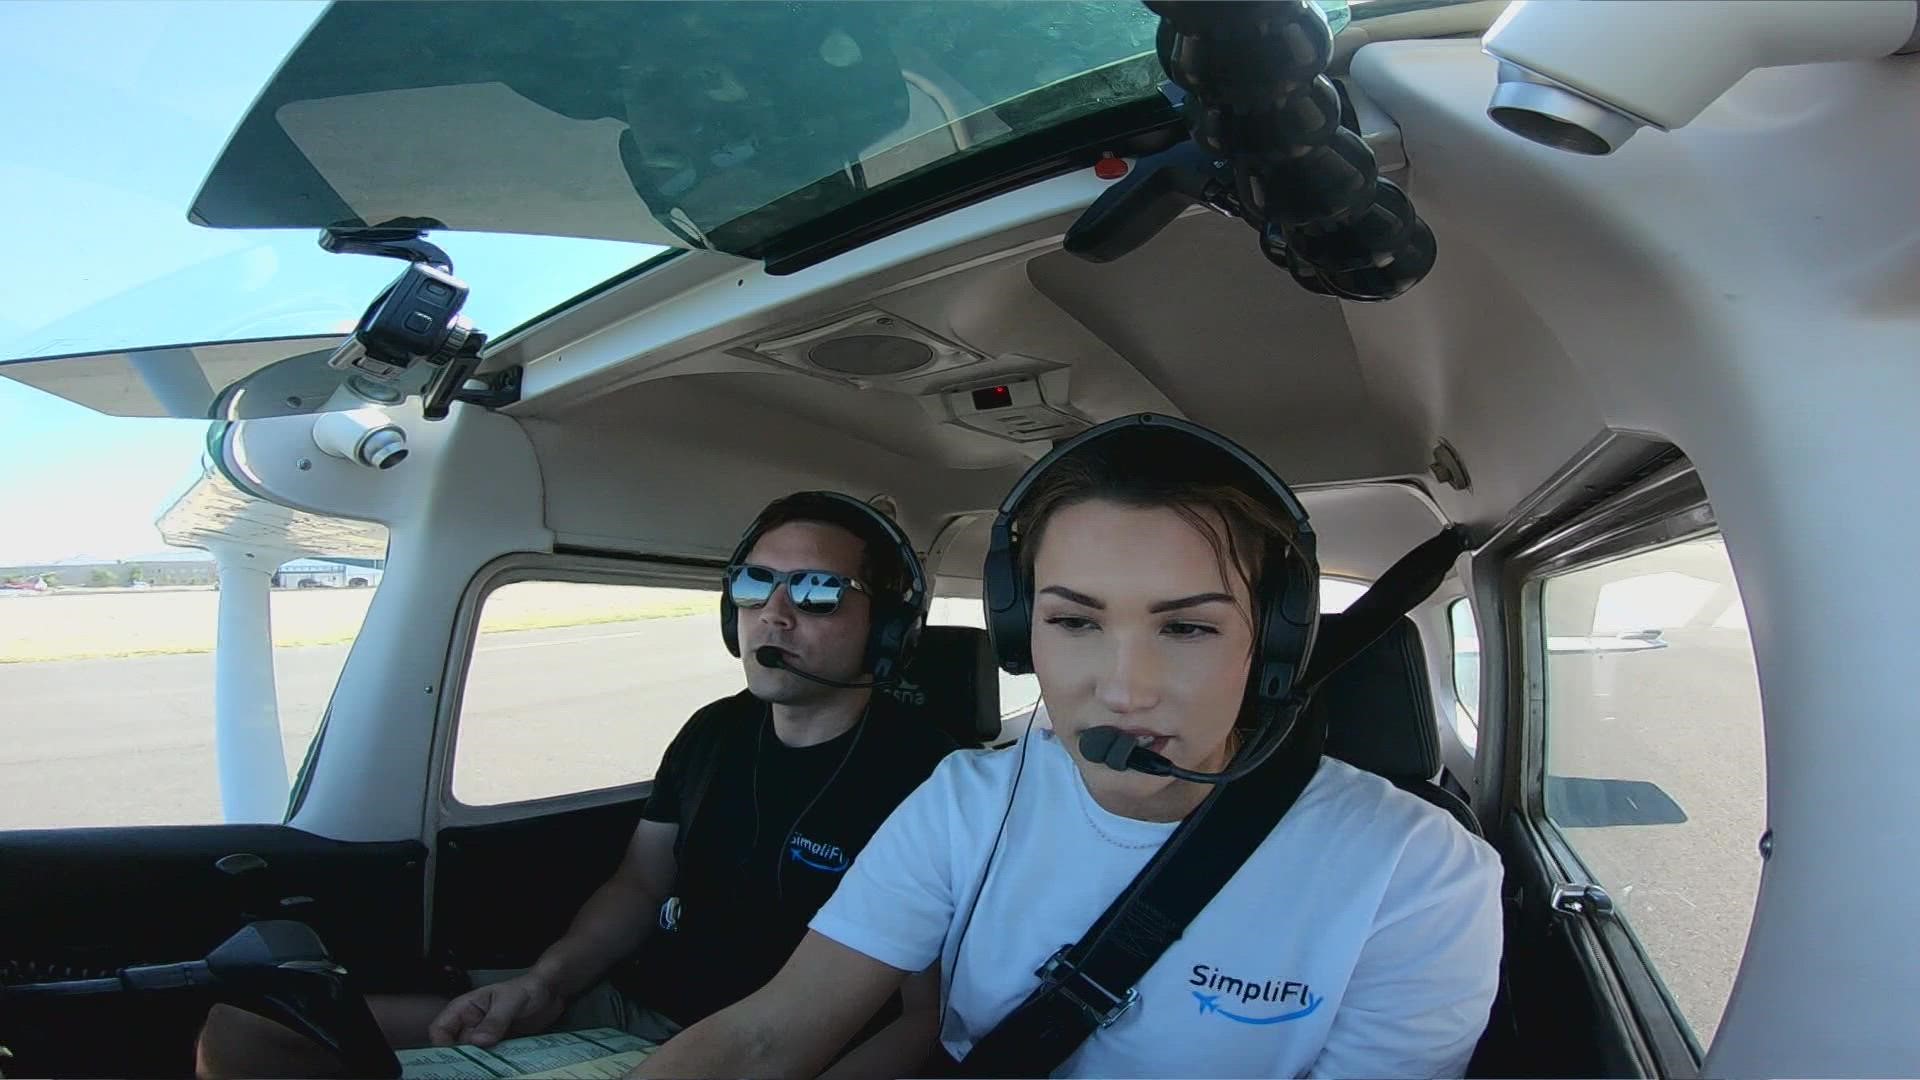 Statistics from the Federal Aviation Administration show that only 8% of all commercial pilots in the U.S. are women. Meet one Valley woman training to change that.